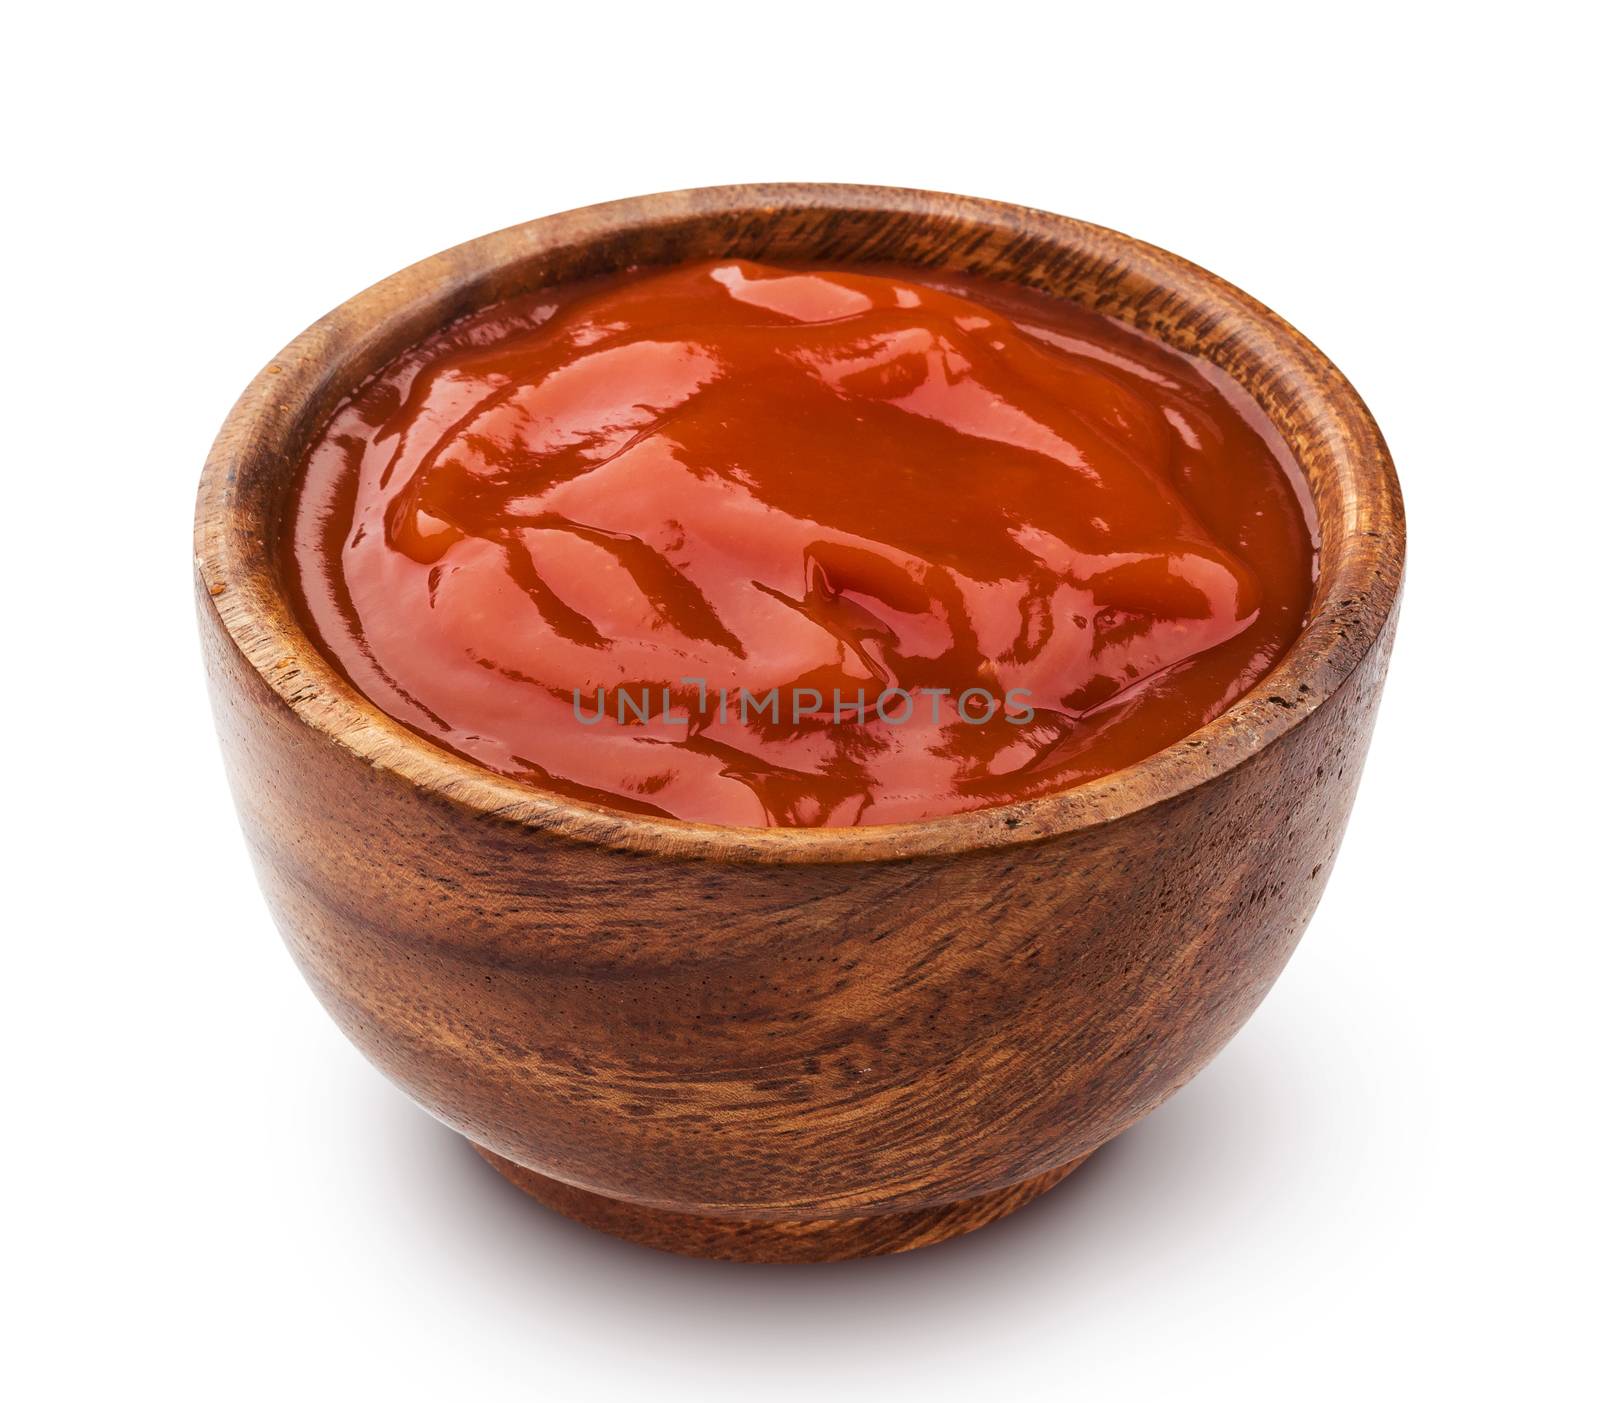 Ketchup in wooden bowl on white background by xamtiw